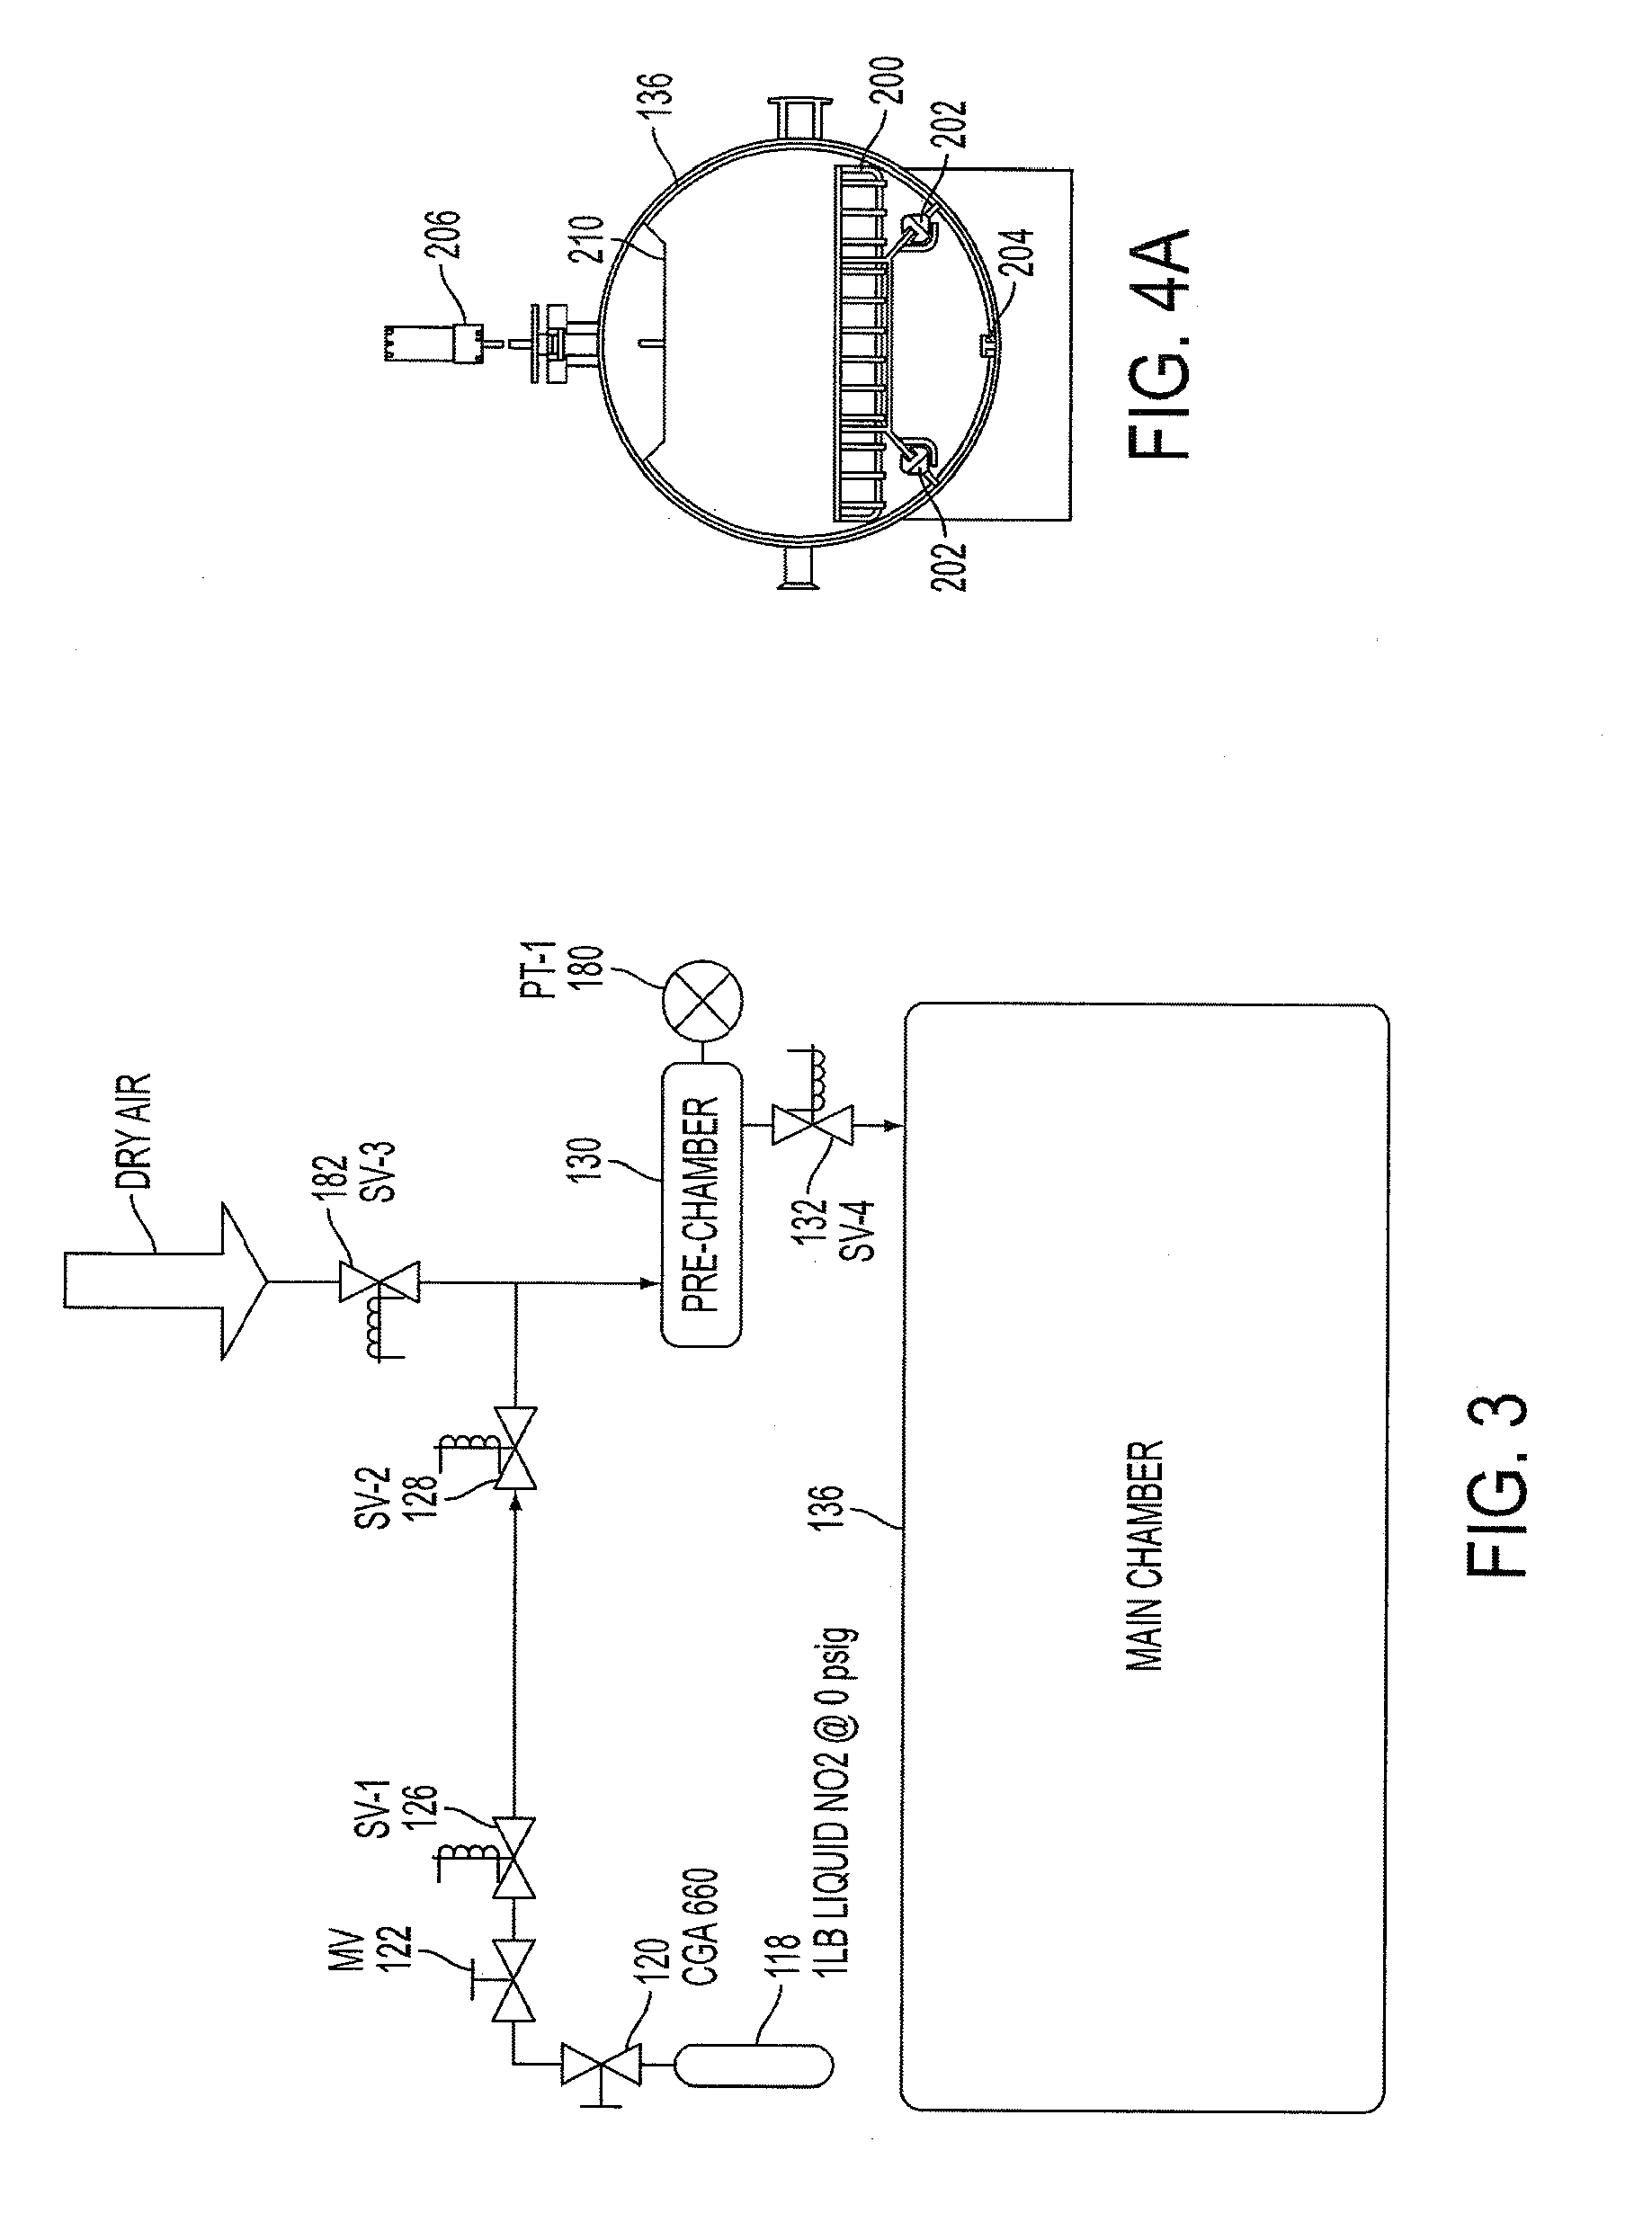 Device and method for gas sterilization